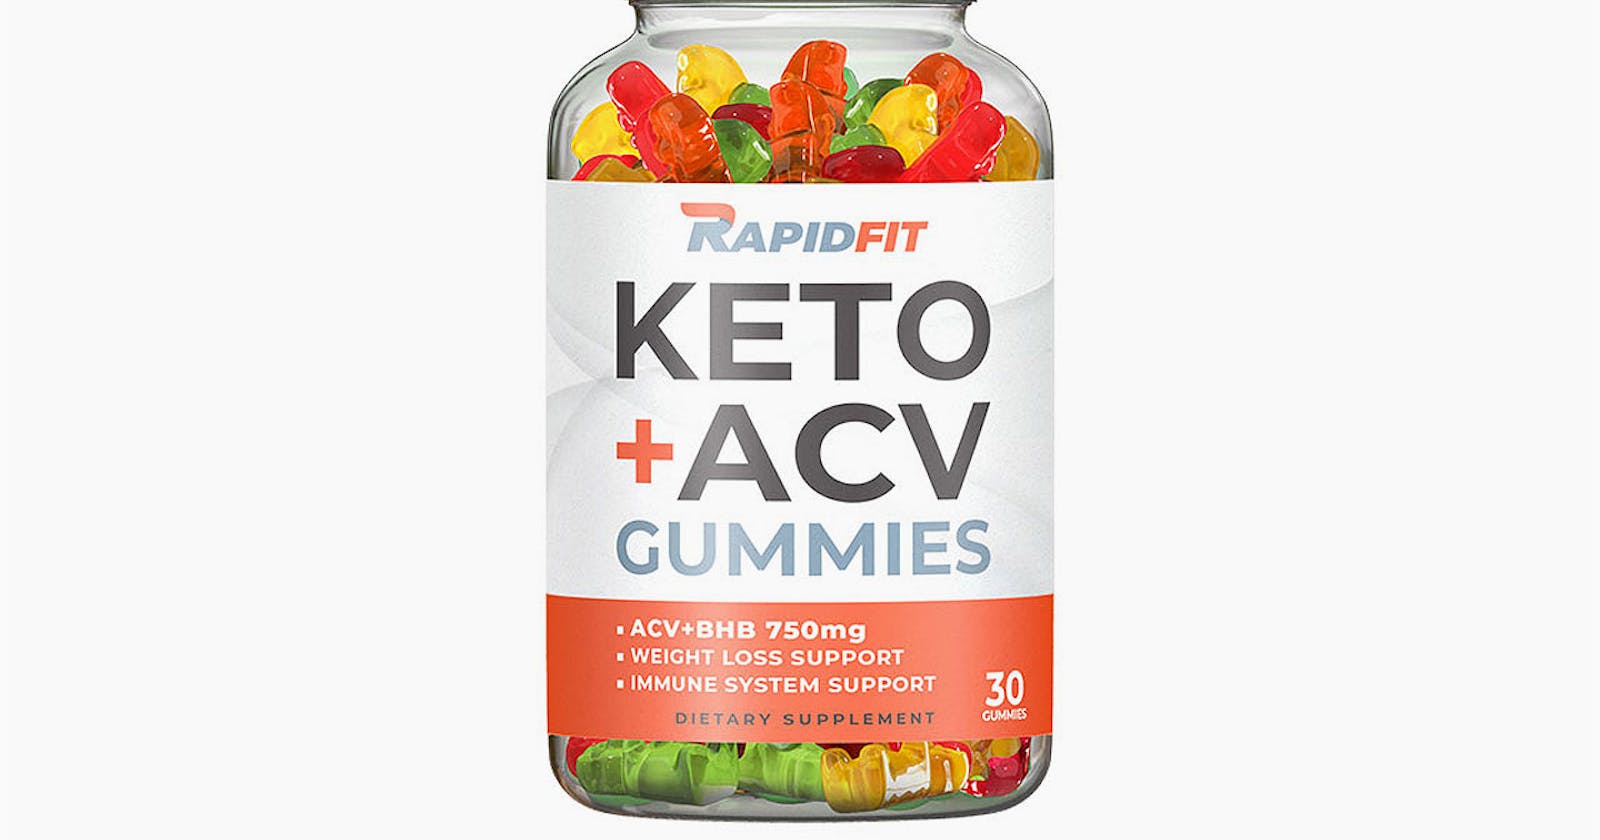 Support Digestive Health and Ketosis with RapidFit Keto ACV Gummies